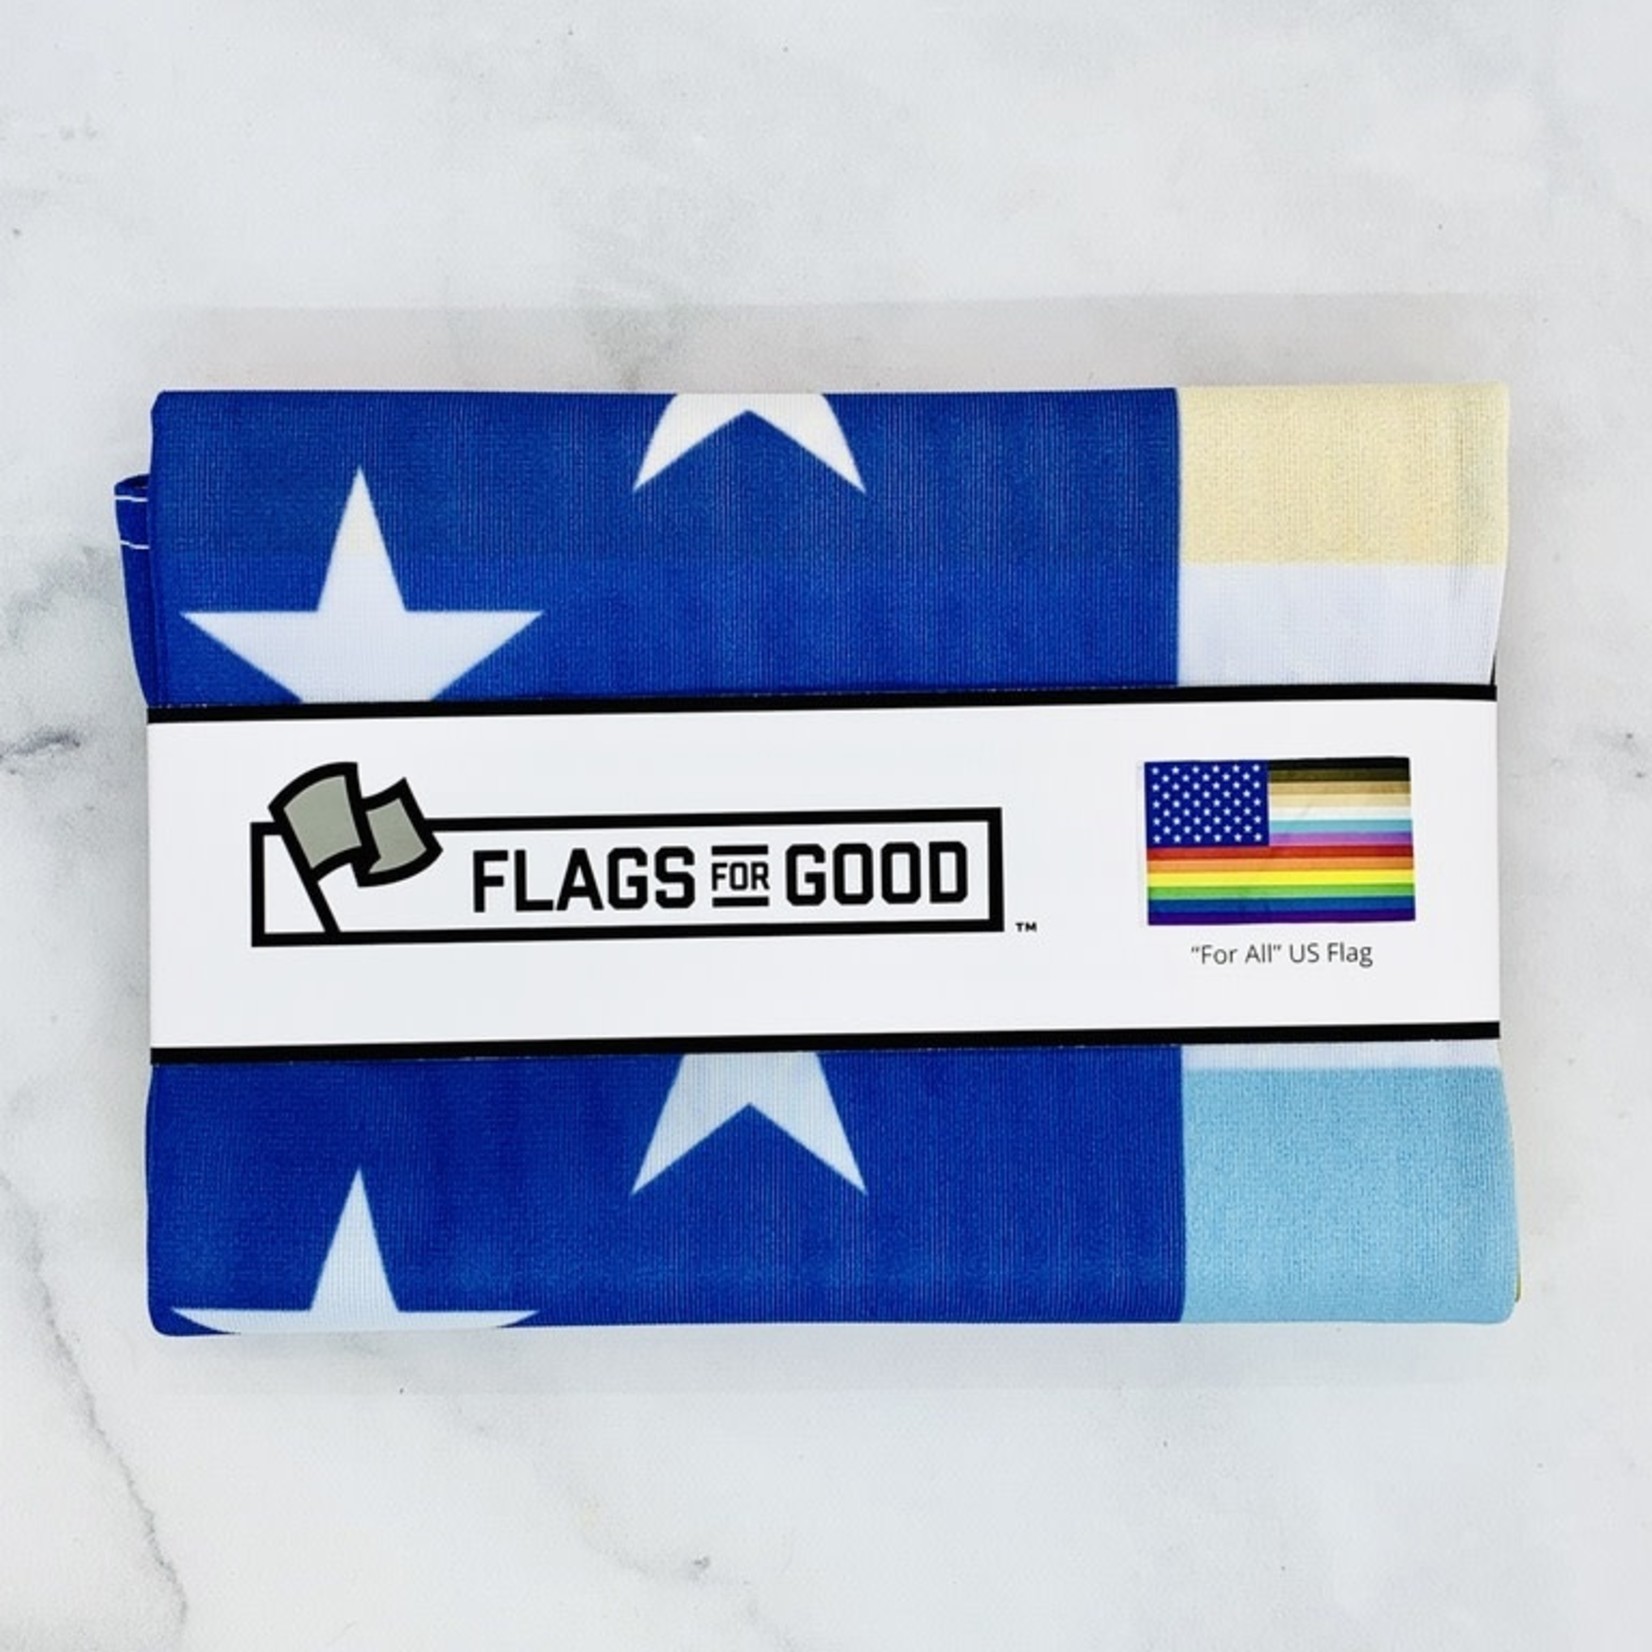 Flags for Good Flags for Good Activism: